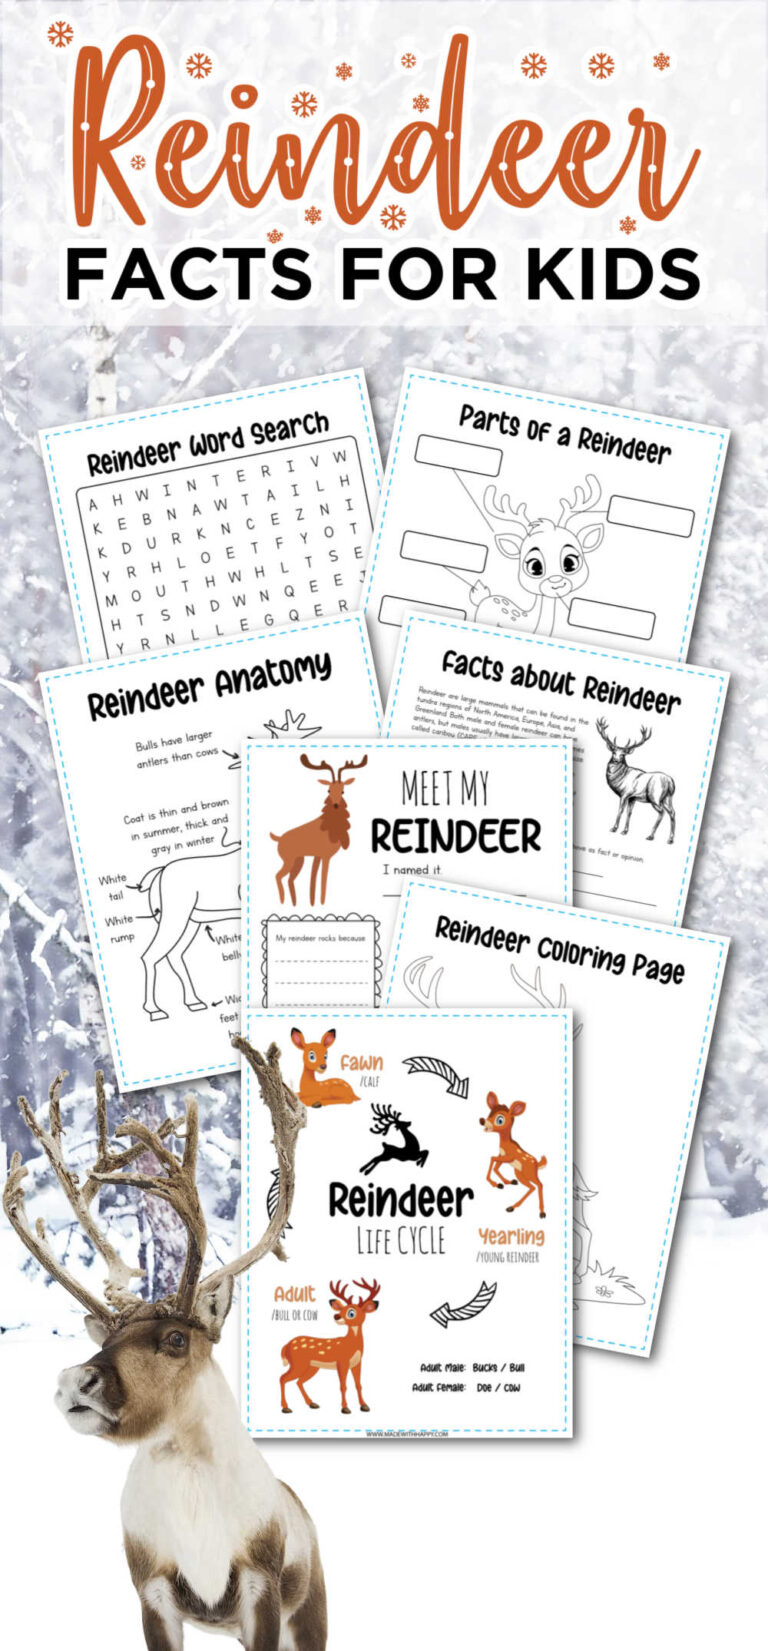 35+ Reindeer Facts For Kids - Free Printables - Made with HAPPY